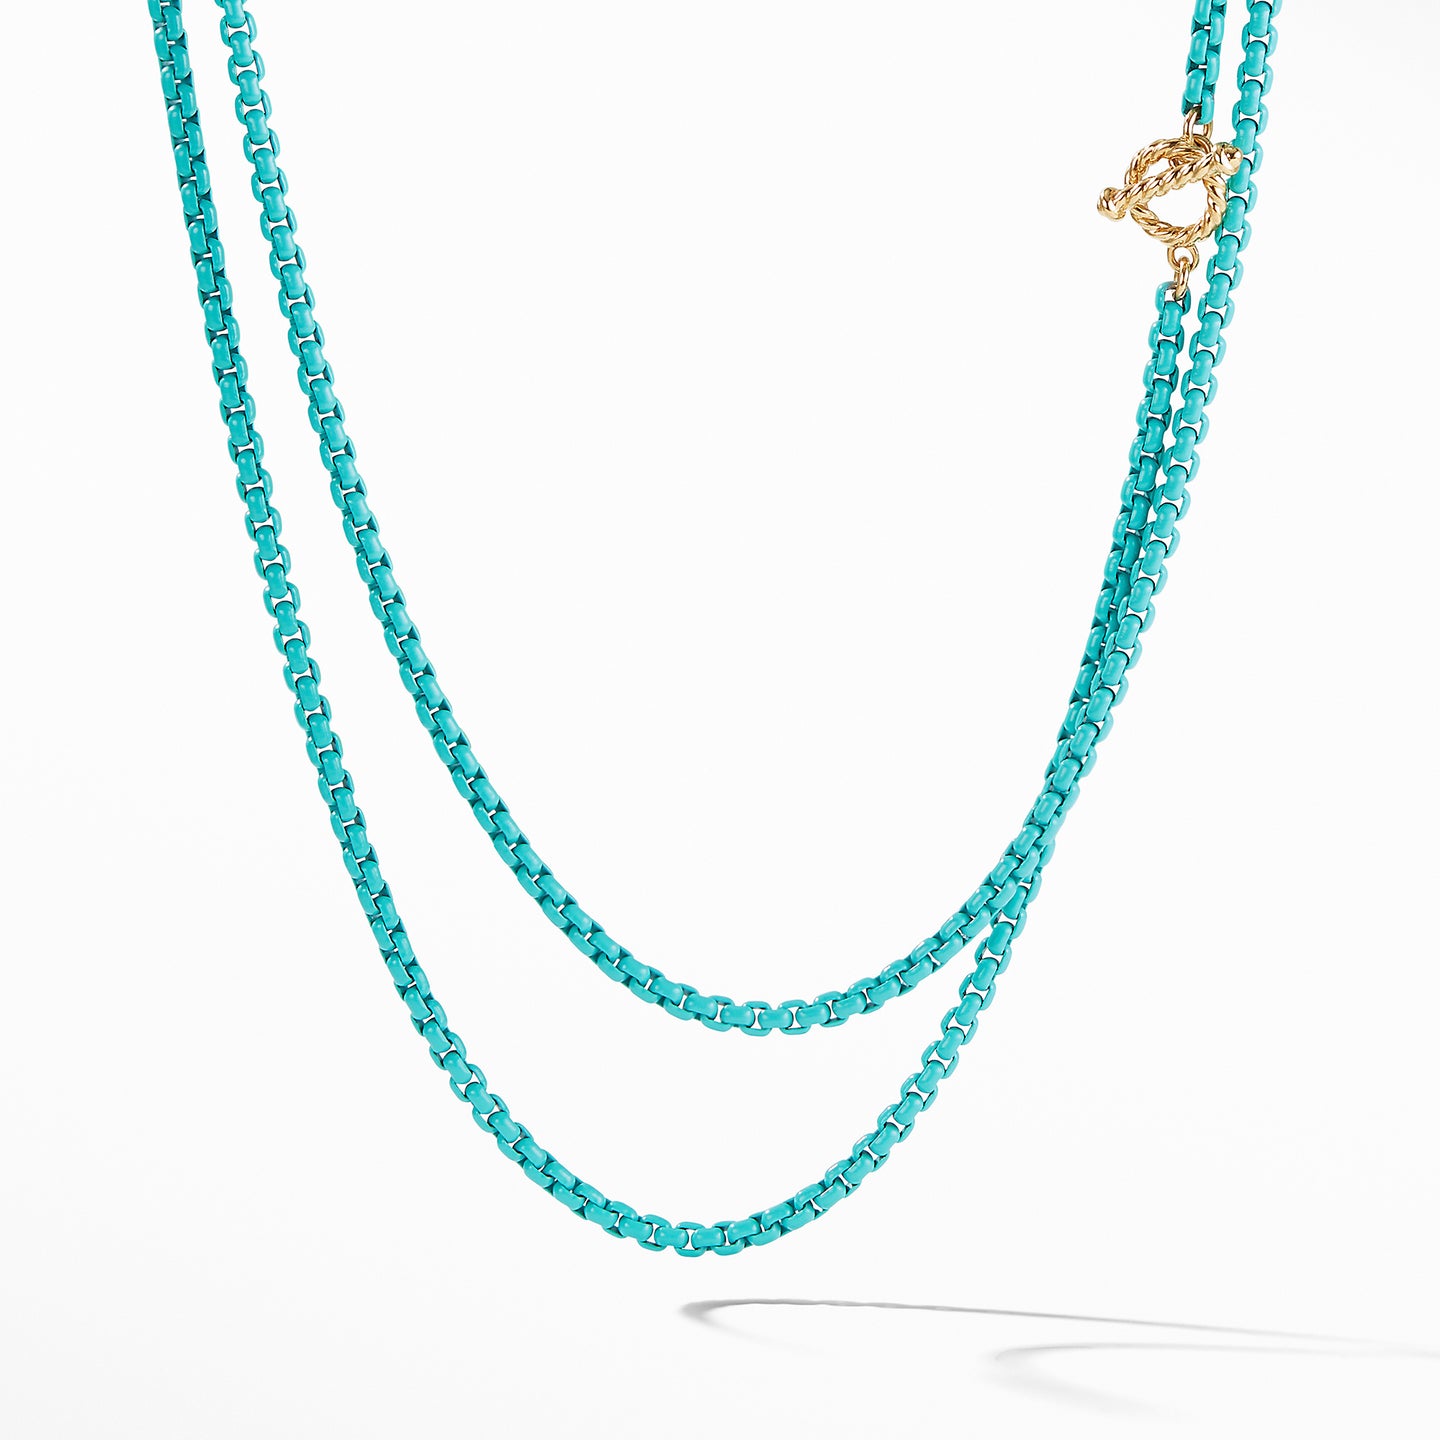 DY Bel Aire Chain Necklace in Turquoise with 14K Gold Accents, 41